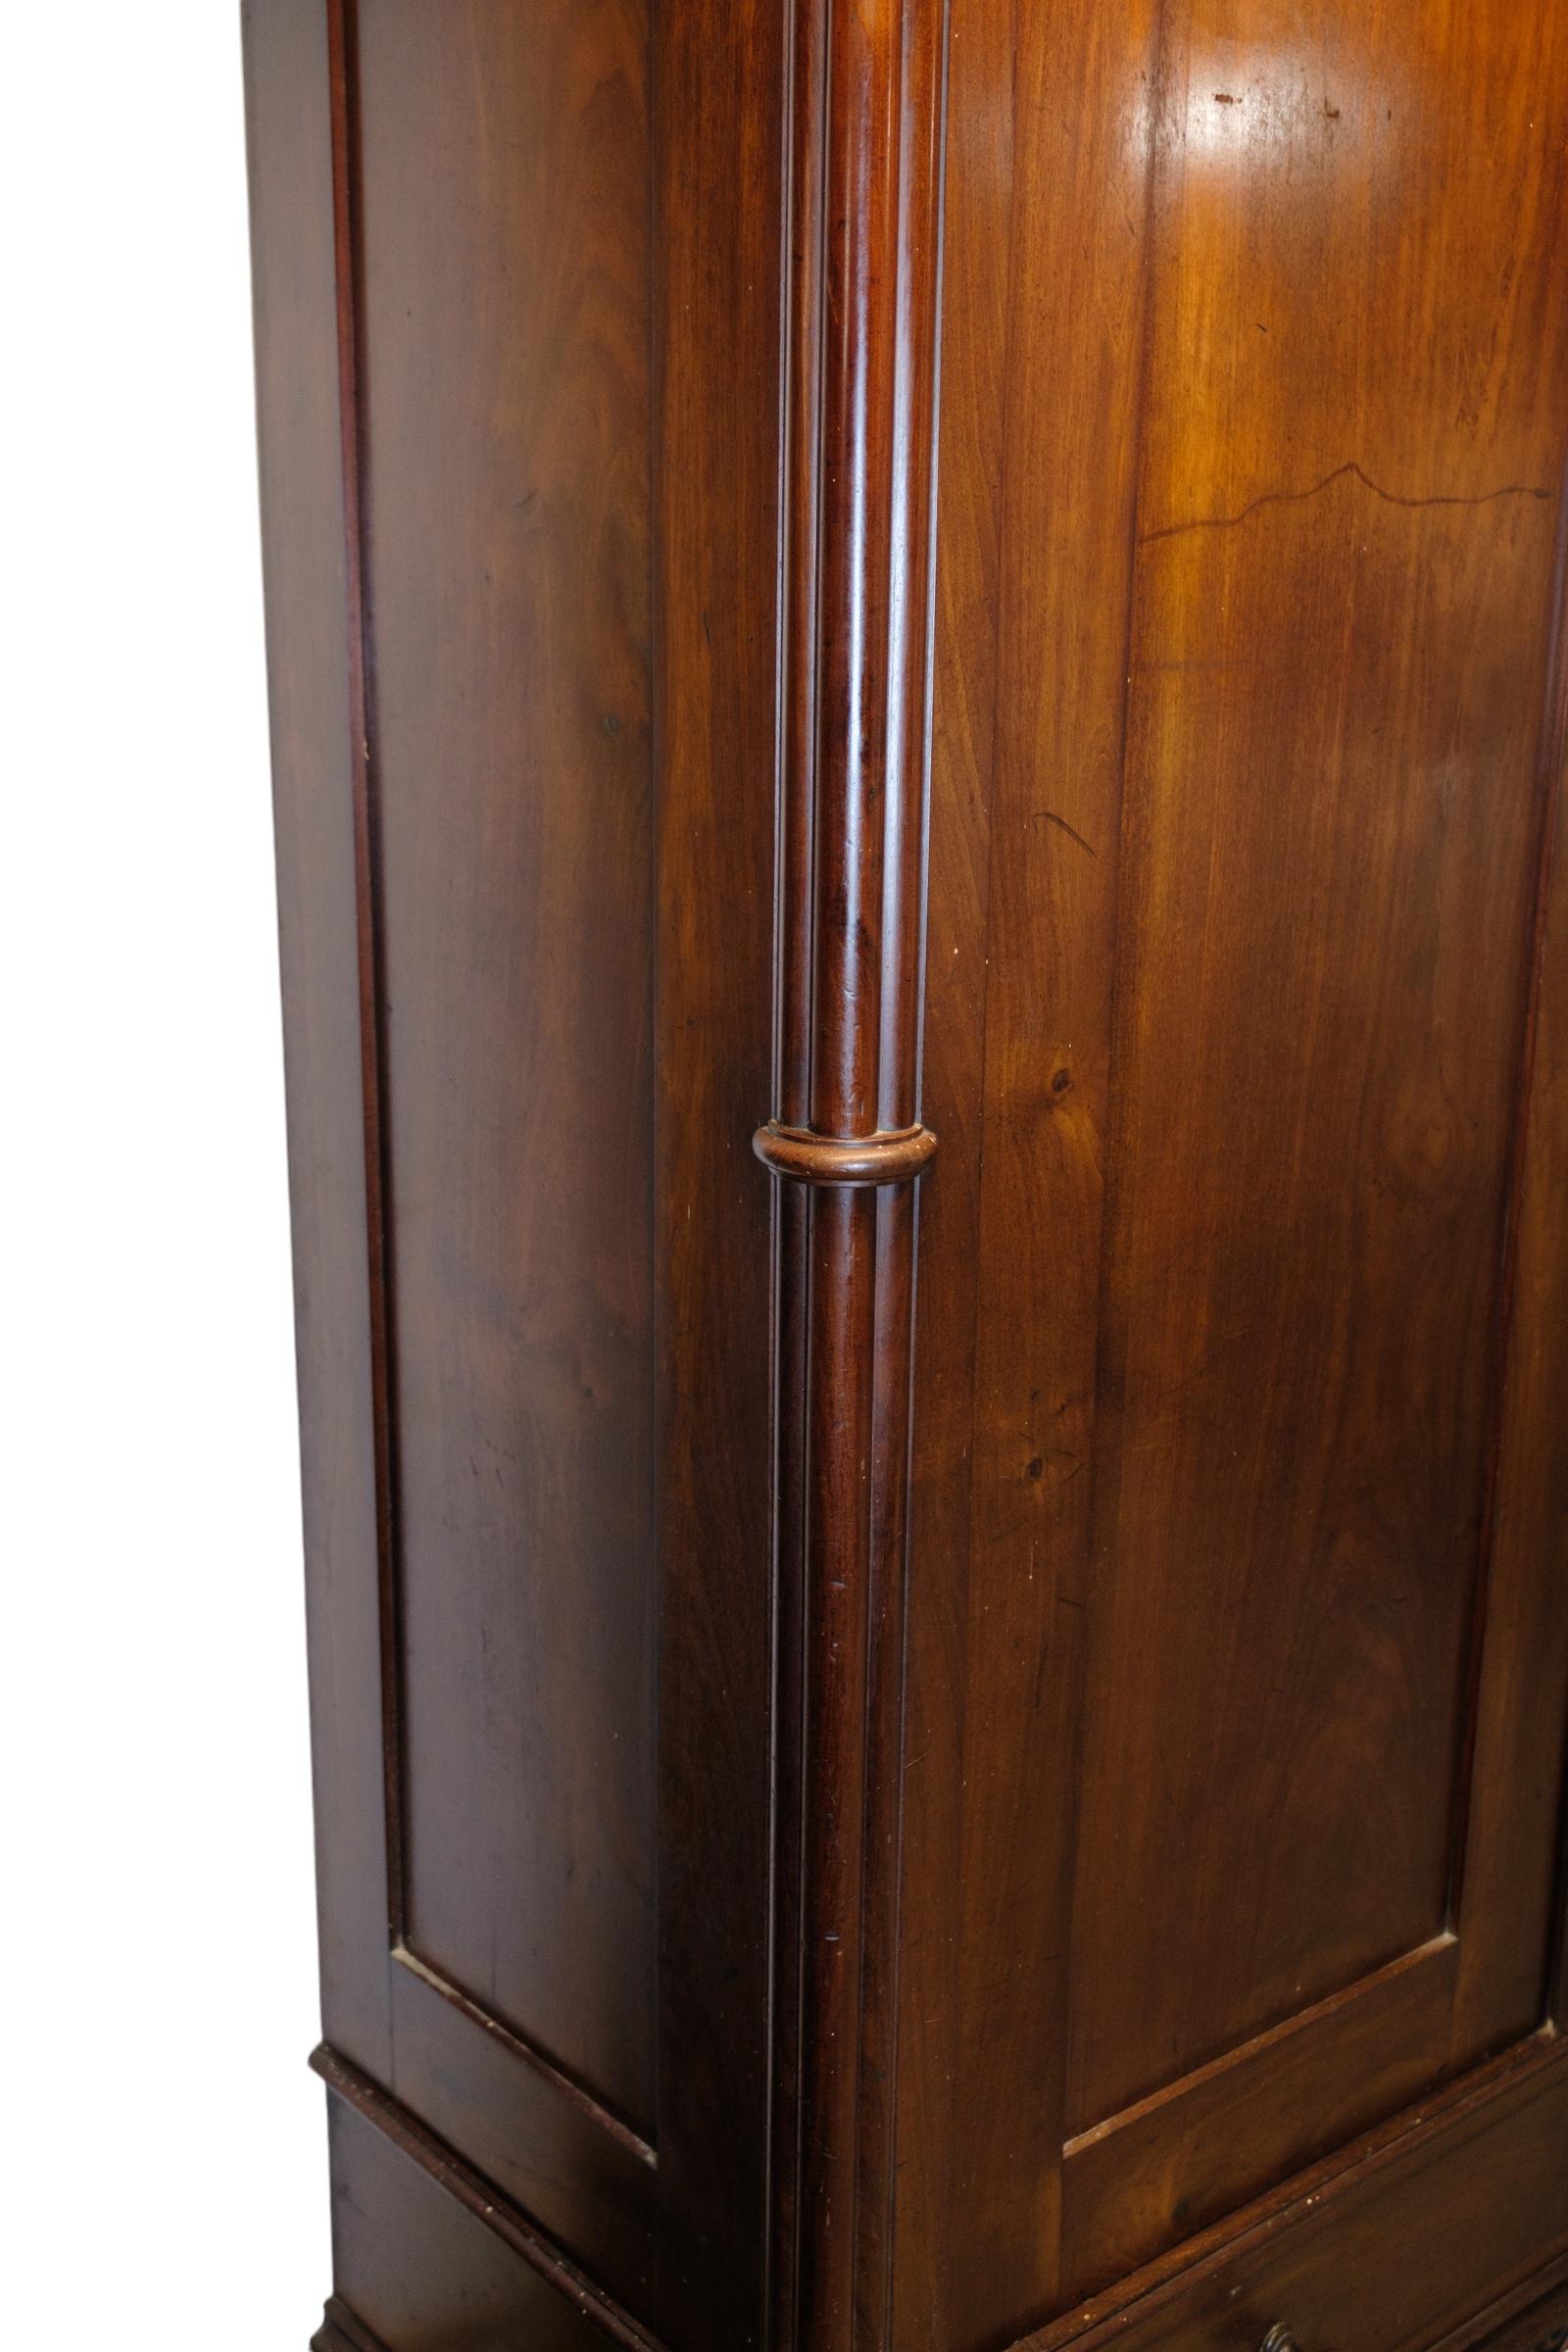 Late Empire mahogany wardrobe from around the 1840s.
Measurements in cm: H:230 W:143 D:56.5